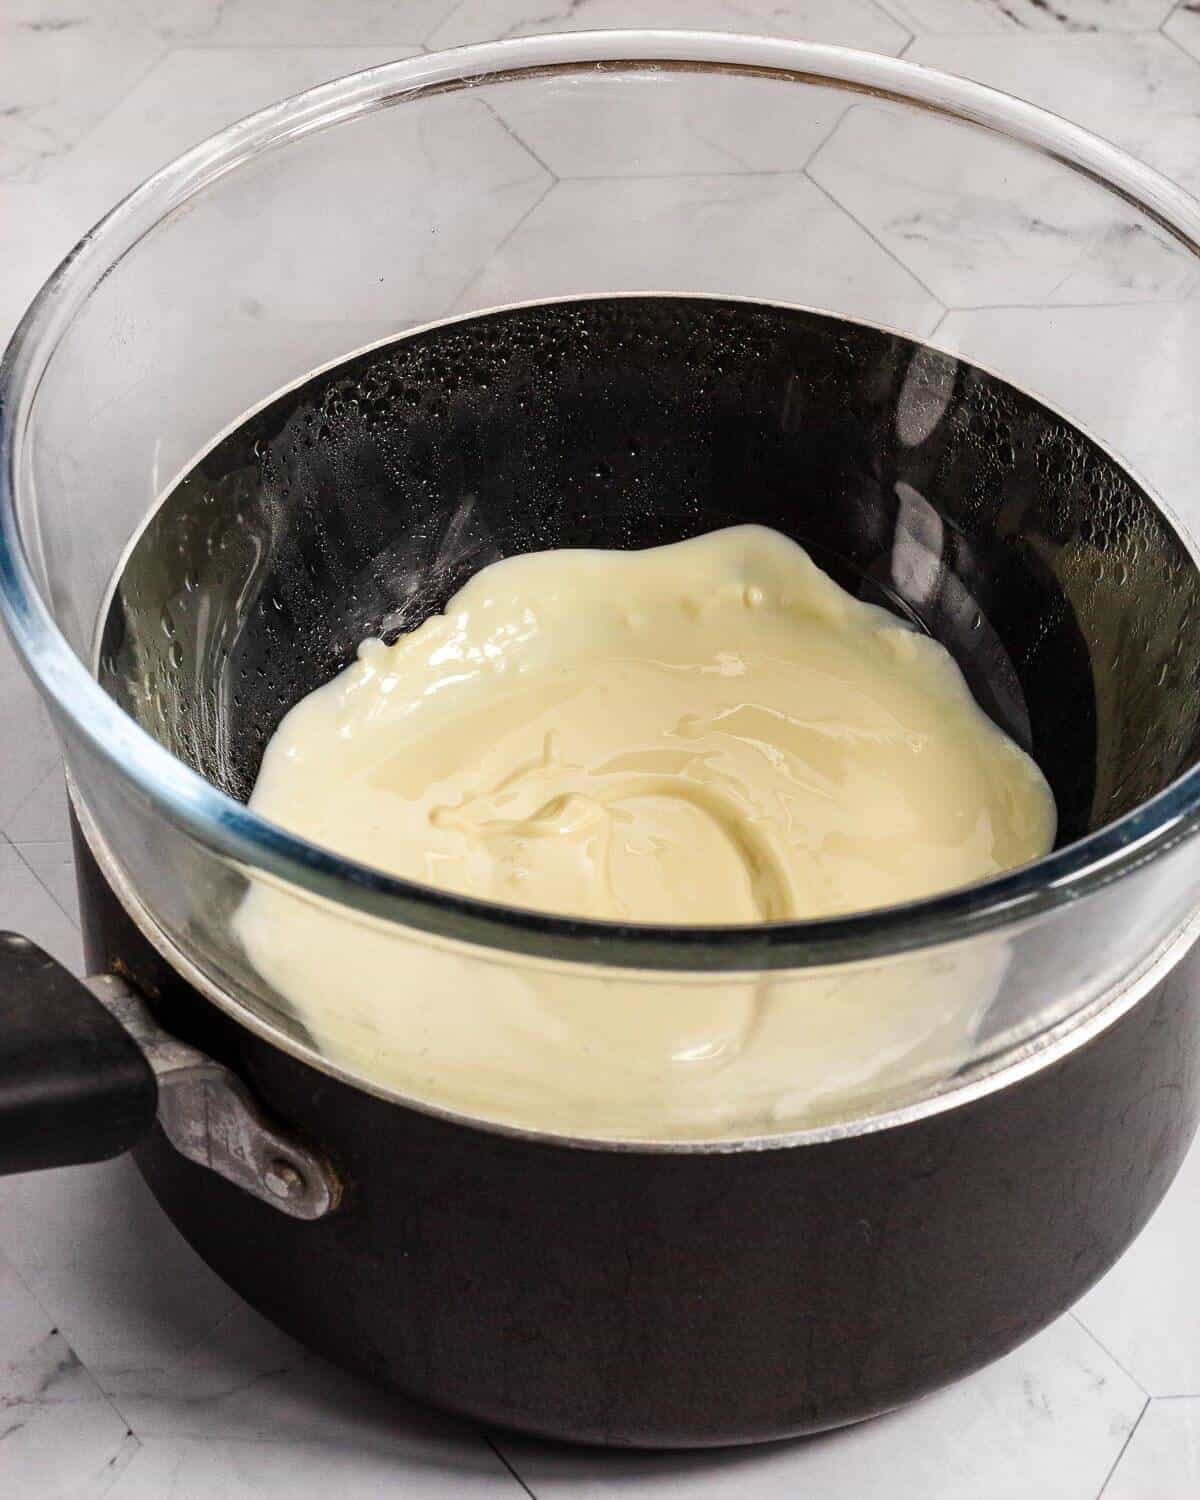 White Chocolate melted using the double boiler method.